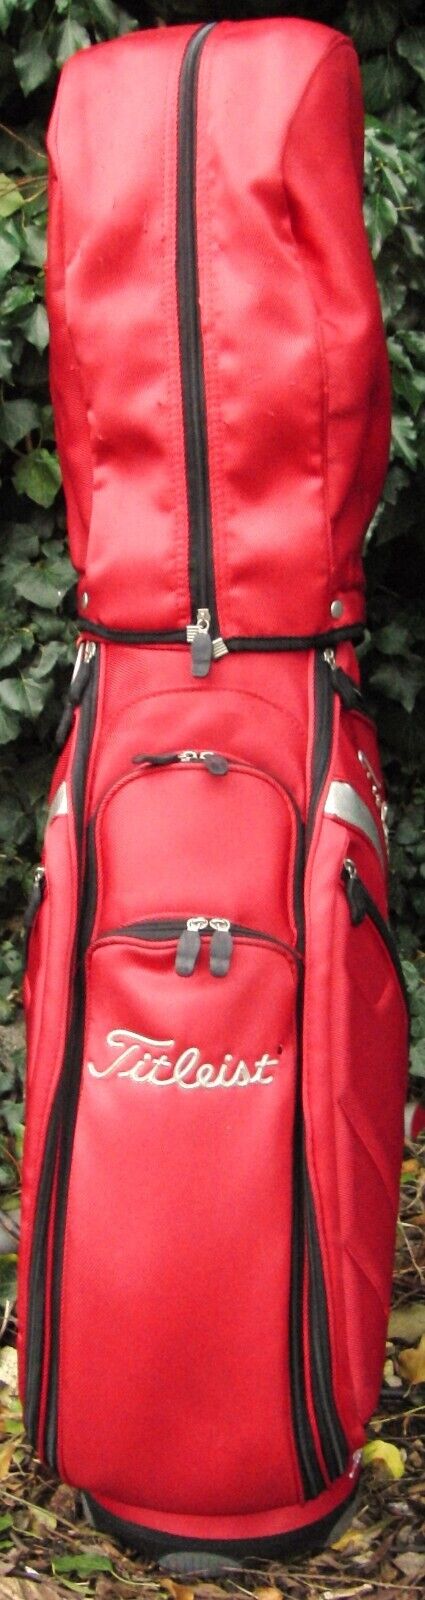 5 Division Titleist Red & White Tour Cart Trolley Golf Clubs Bag